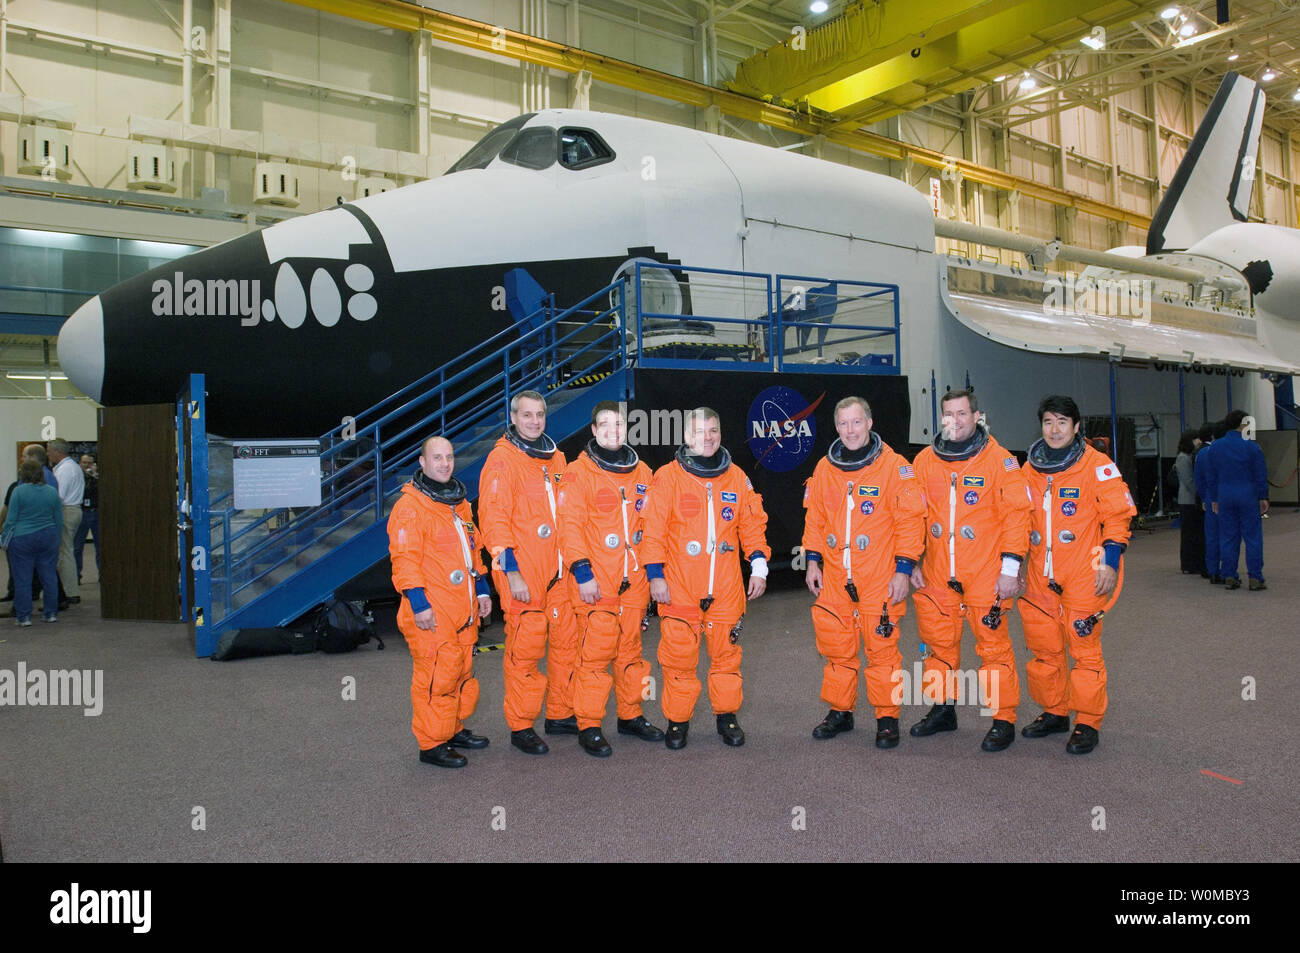 The STS-123 crewmembers are pictured during a training session at the Space Vehicle Mockup Facility at the Johnson Space Center in Houston, Texas on December 19, 2007. From left are astronauts Garrett E. Reisman, Richard M. Linnehan and Robert L. Behnken, all mission specialists; Gregory H. Johnson, pilot; Dominic L. Gorie, commander; Michael J. Foreman and Japan Aerospace Exploration Agency's (JAXA) Takao Doi, both mission specialists. The STS-123 mission crew is scheduled to launch to the International Space Station on Space Shuttle Endeavour on March 11, 2008. (UPI Photo/NASA) Stock Photo